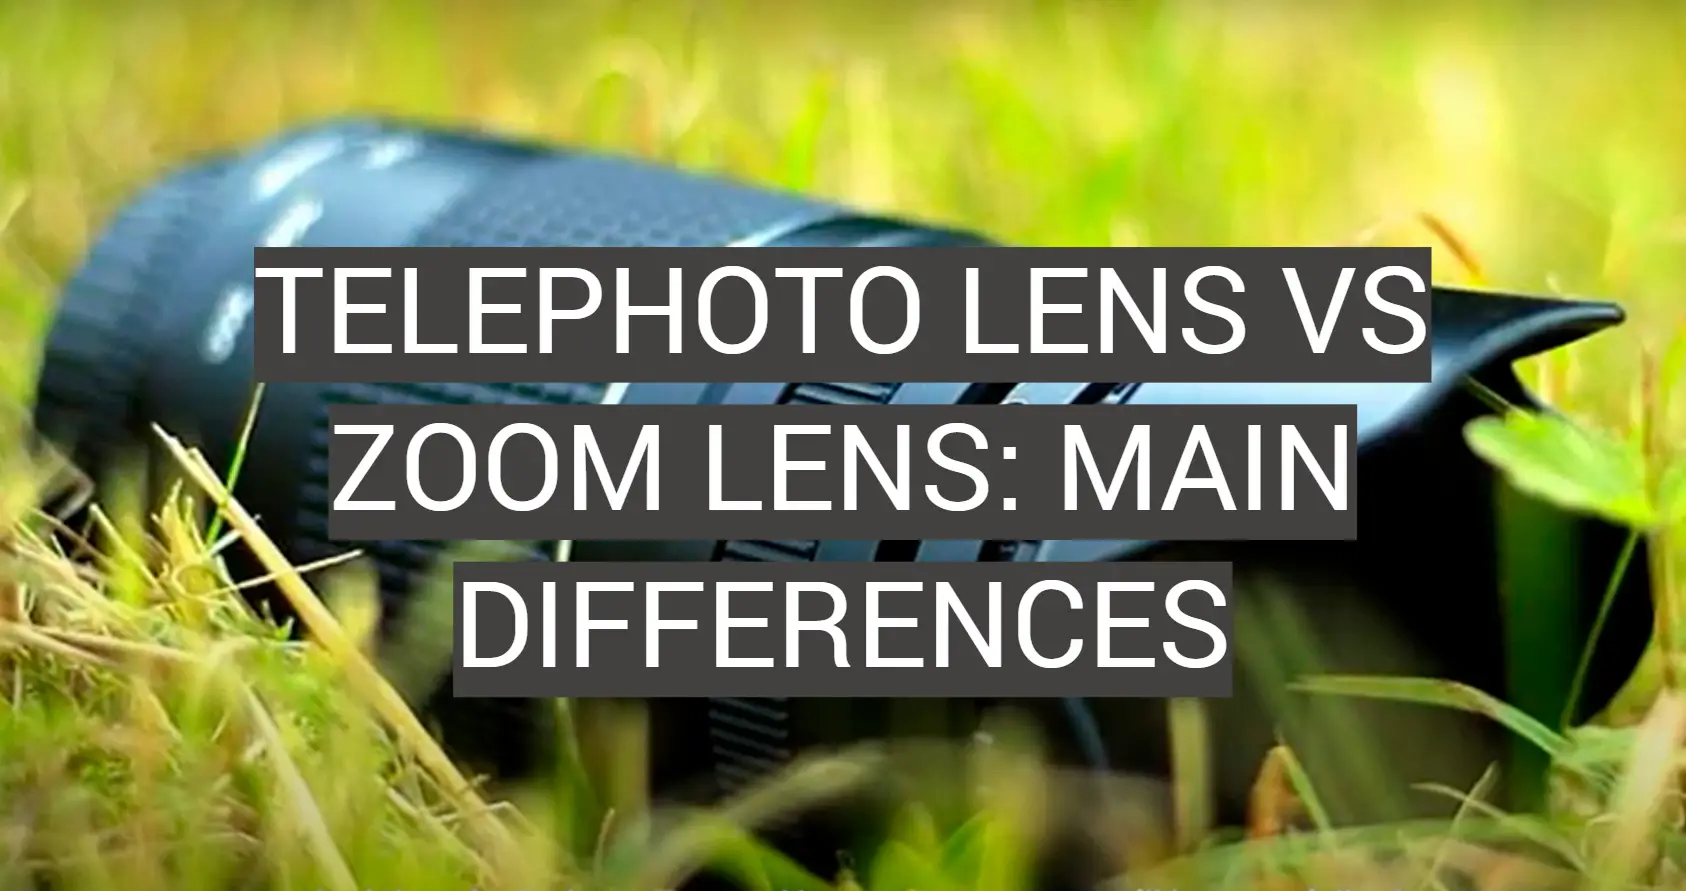 Telephoto Lens vs Zoom Lens: Main Differences